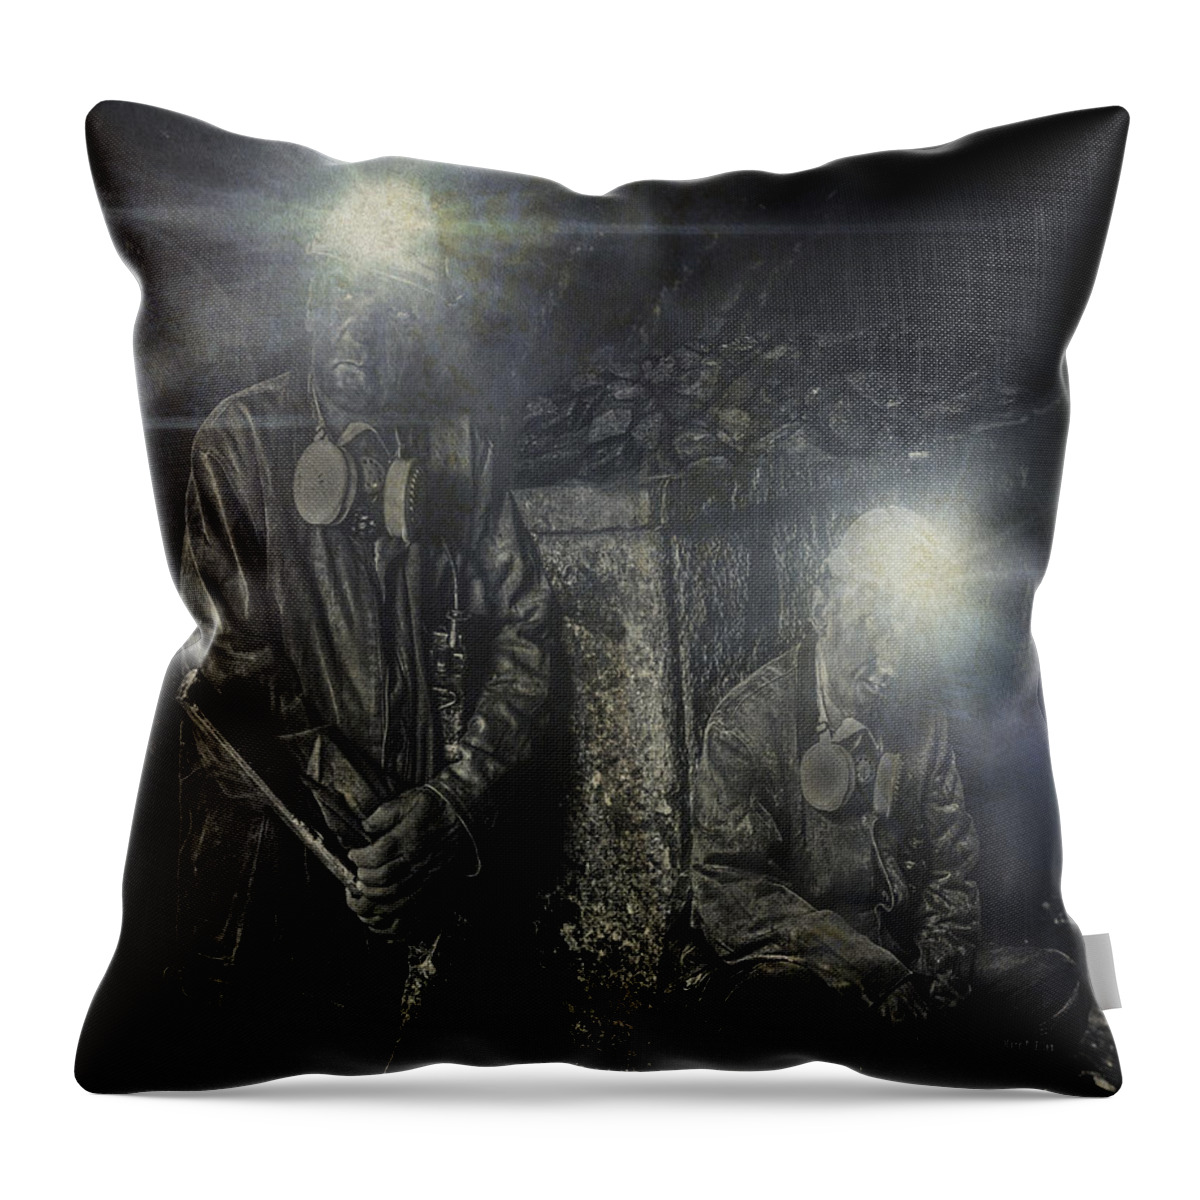 Coal Throw Pillow featuring the digital art Coal Miners by Mark Allen